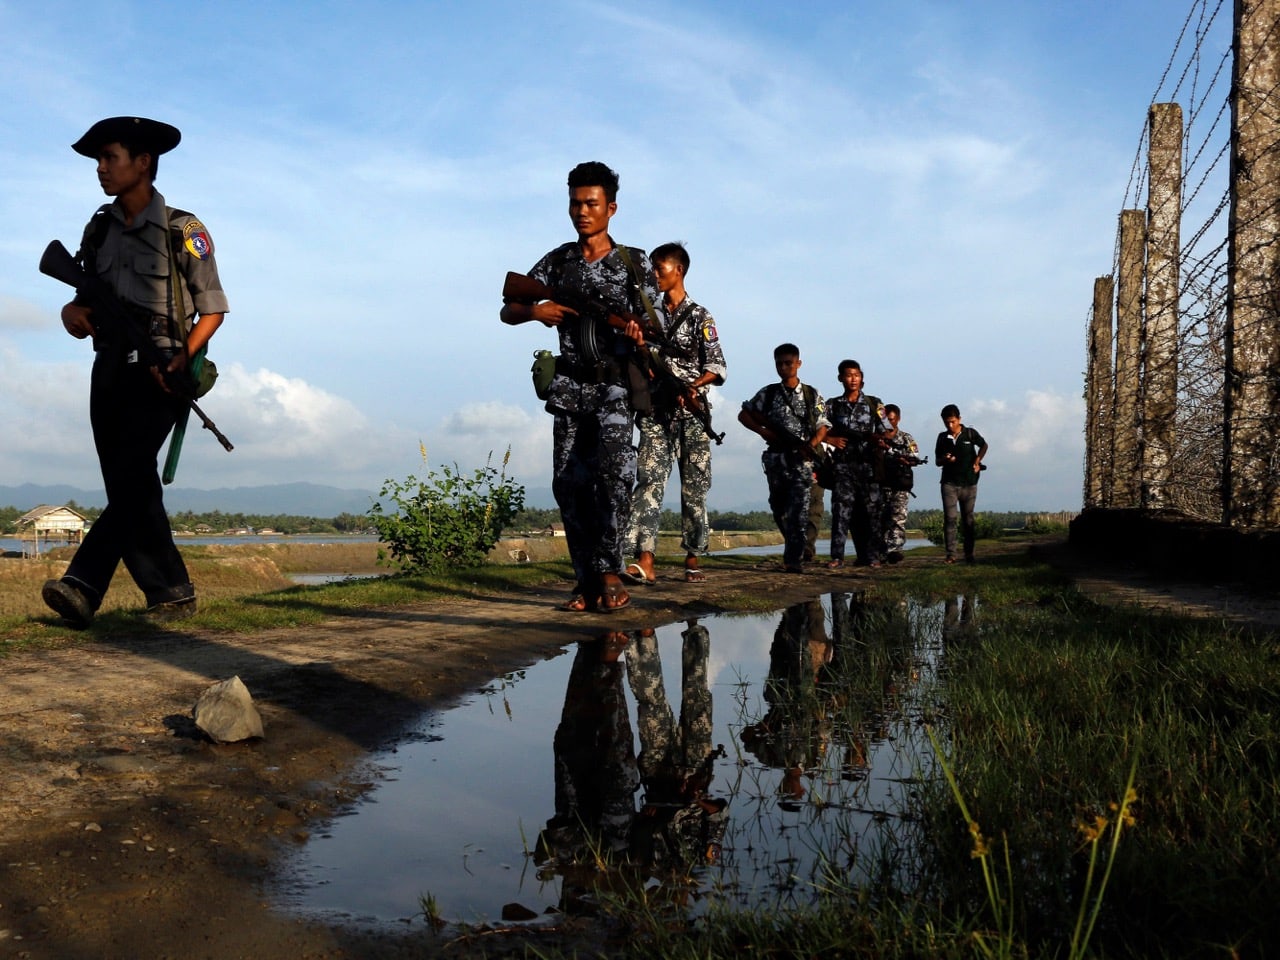 Police officers patrol along the border fence between Burma and Bangladesh in Maungdaw, Rakhine State, 14 October 2016, AP Photo/Thein Zaw